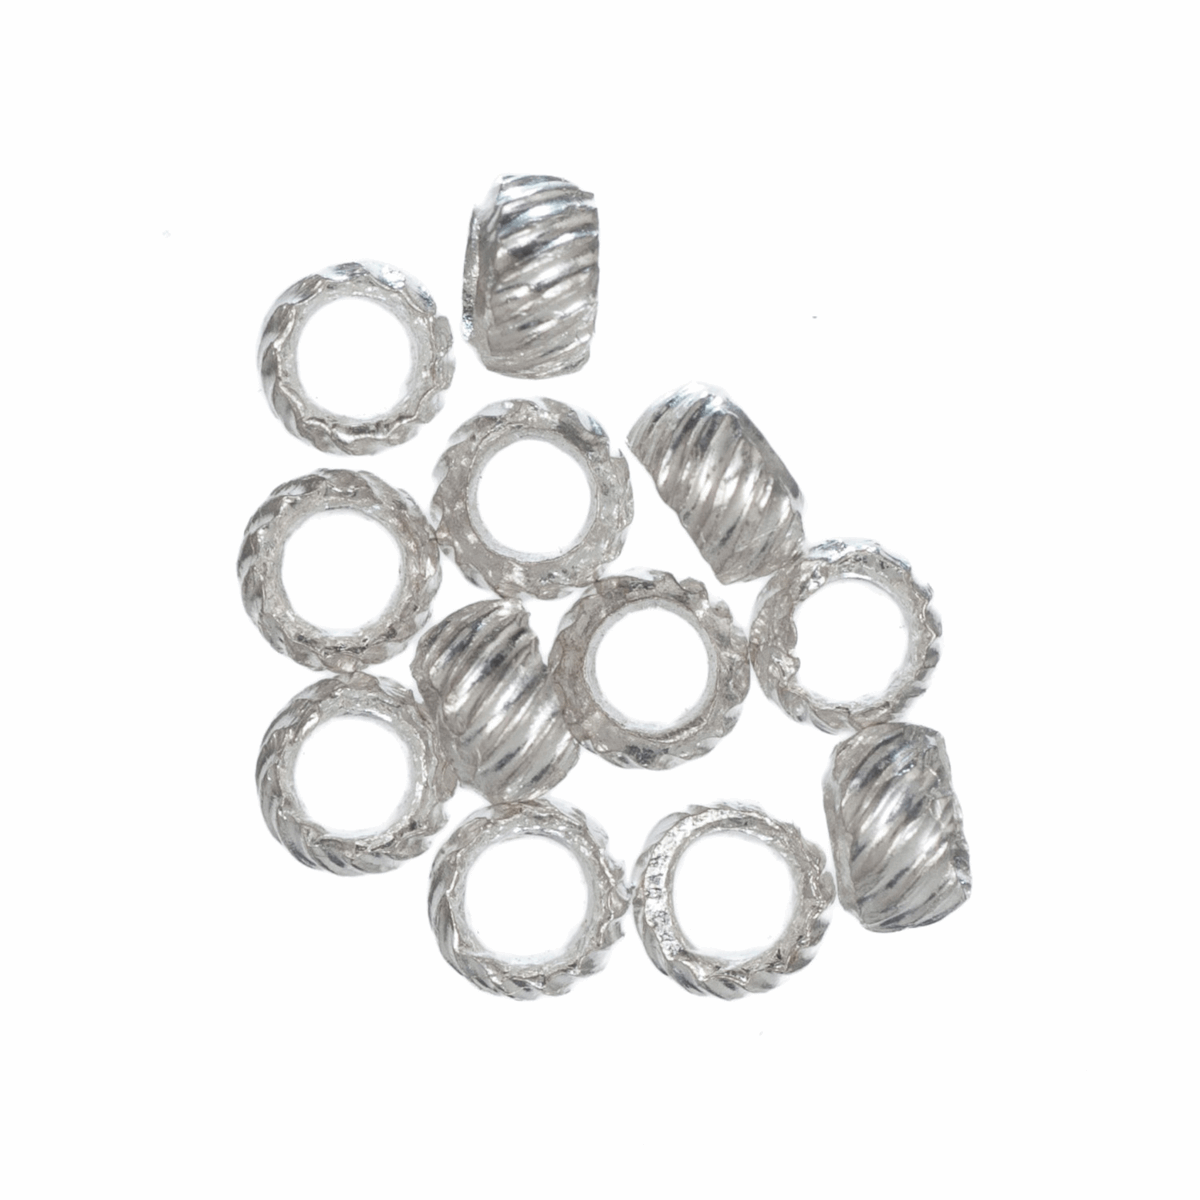 Trimits Deluxe Silver Patterned Spacer Beads (Pack of 12)